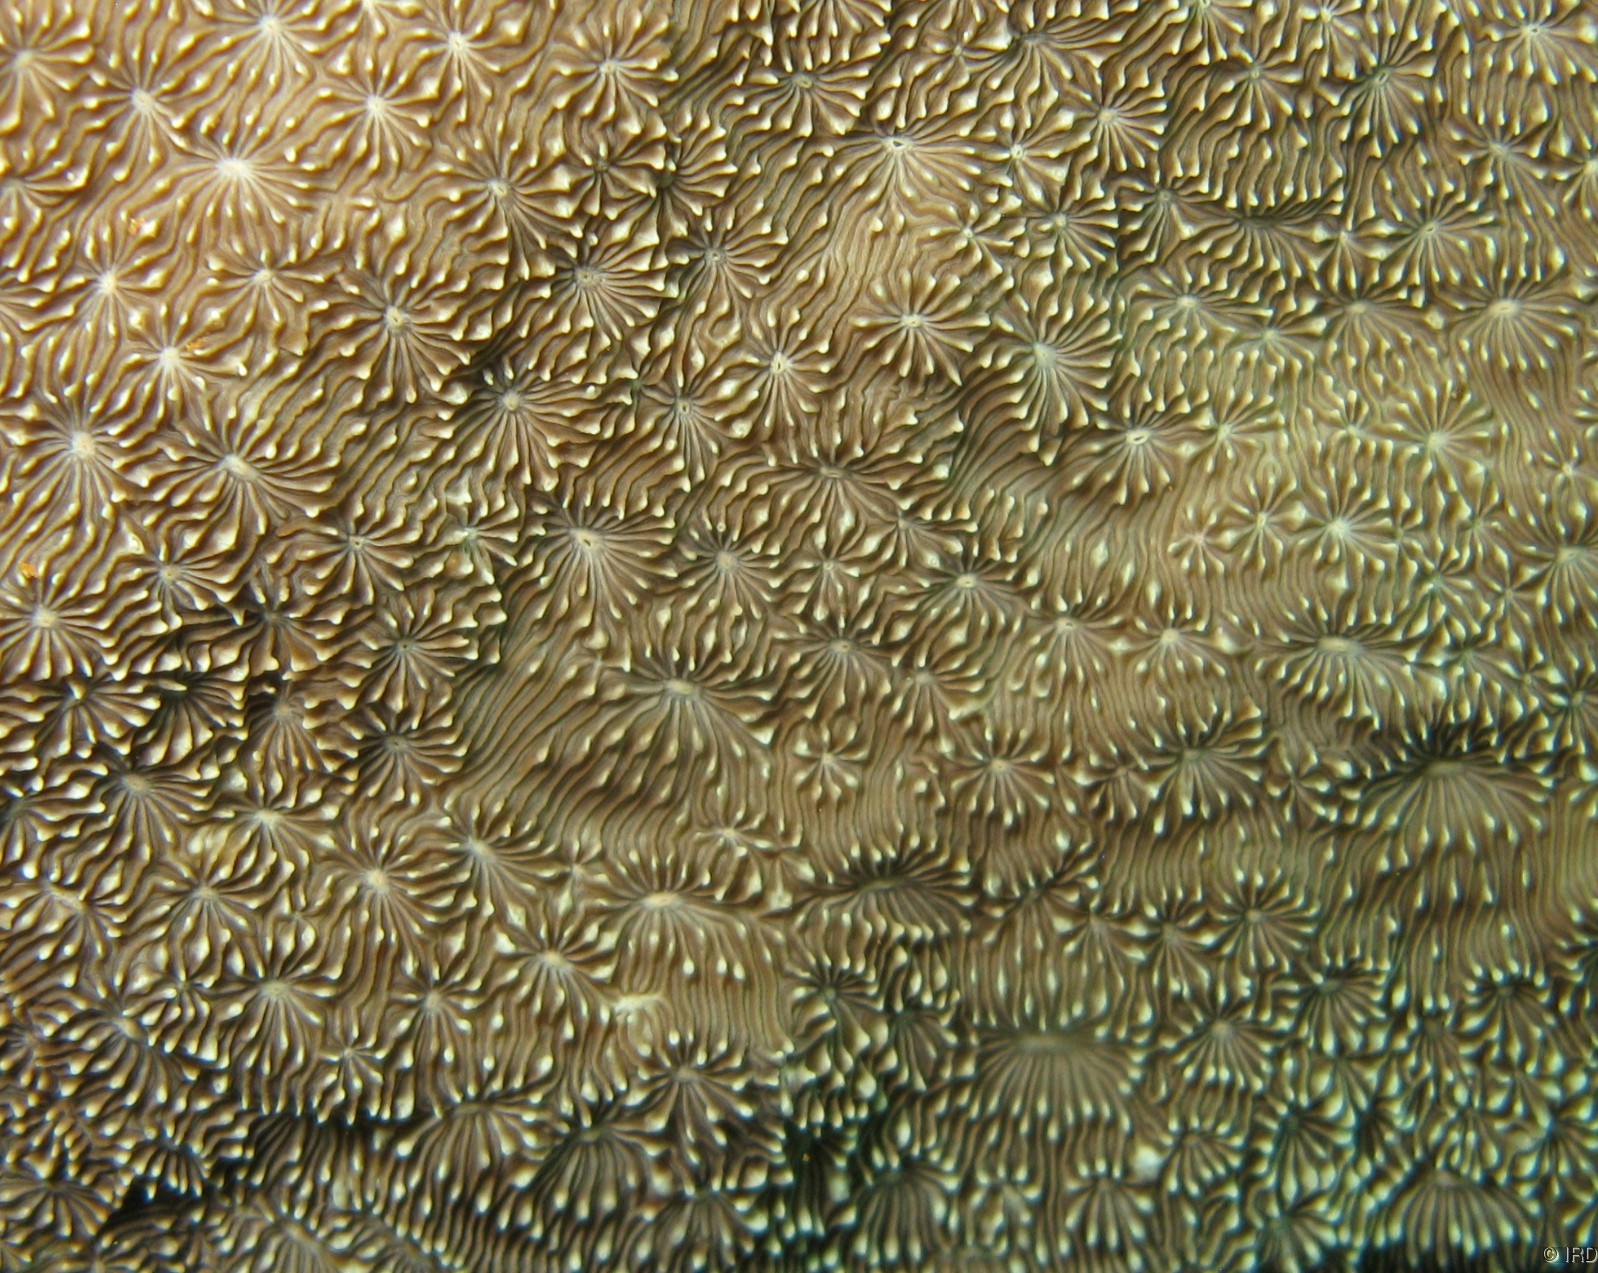 Pavona explanulata - Close up of a colony in situ - HS0388